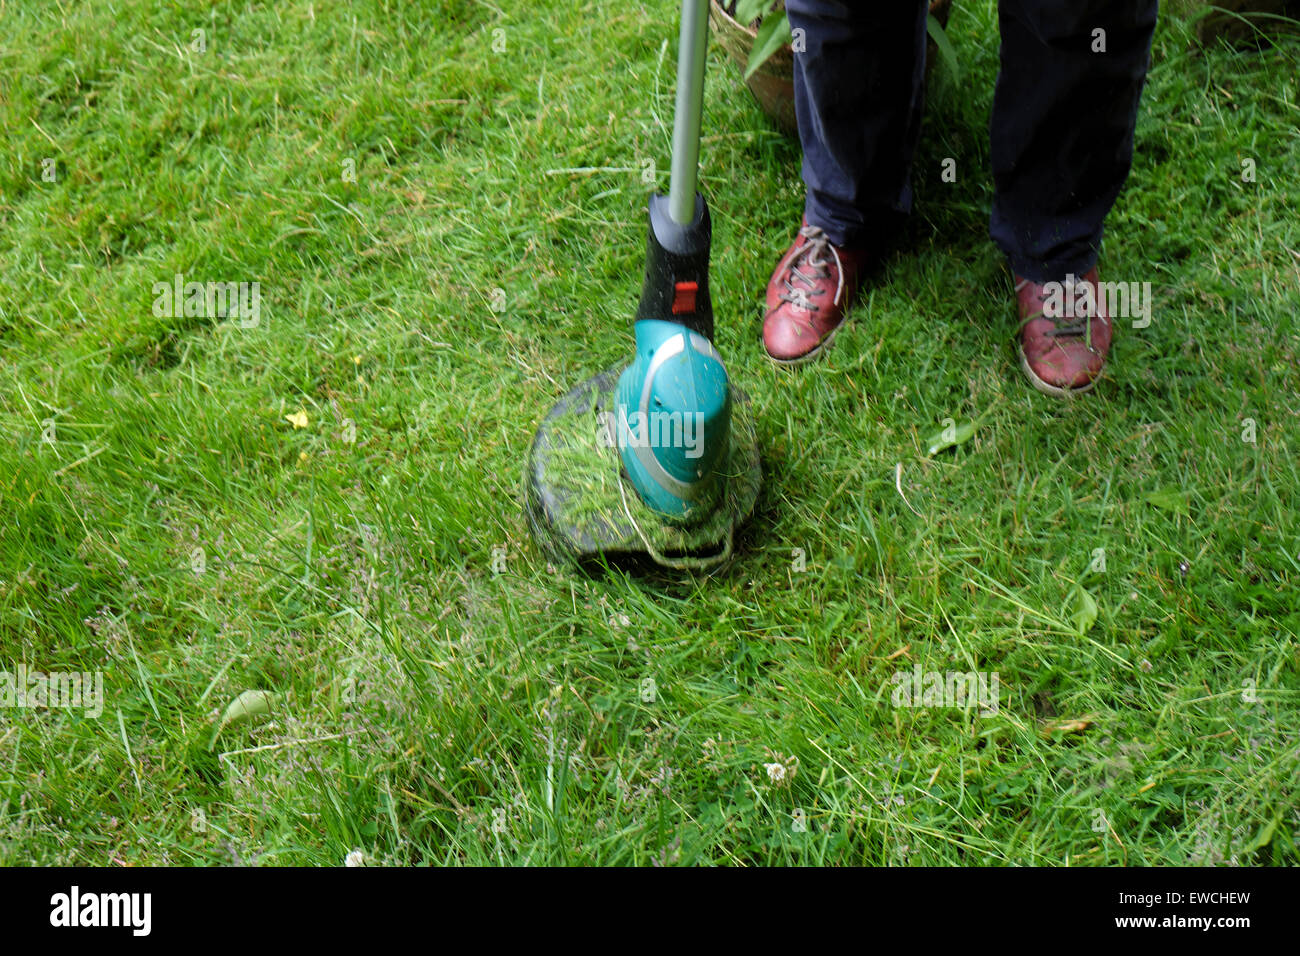 Carmarthenshire, Wales, UK. 22nd June 2015. A woman using a strimmer to cut the grass in an overgrown garden on a fine afternoon in rural Carmarthenshire West Wales UK  Kathy deWitt/AlamyLiveNews Stock Photo